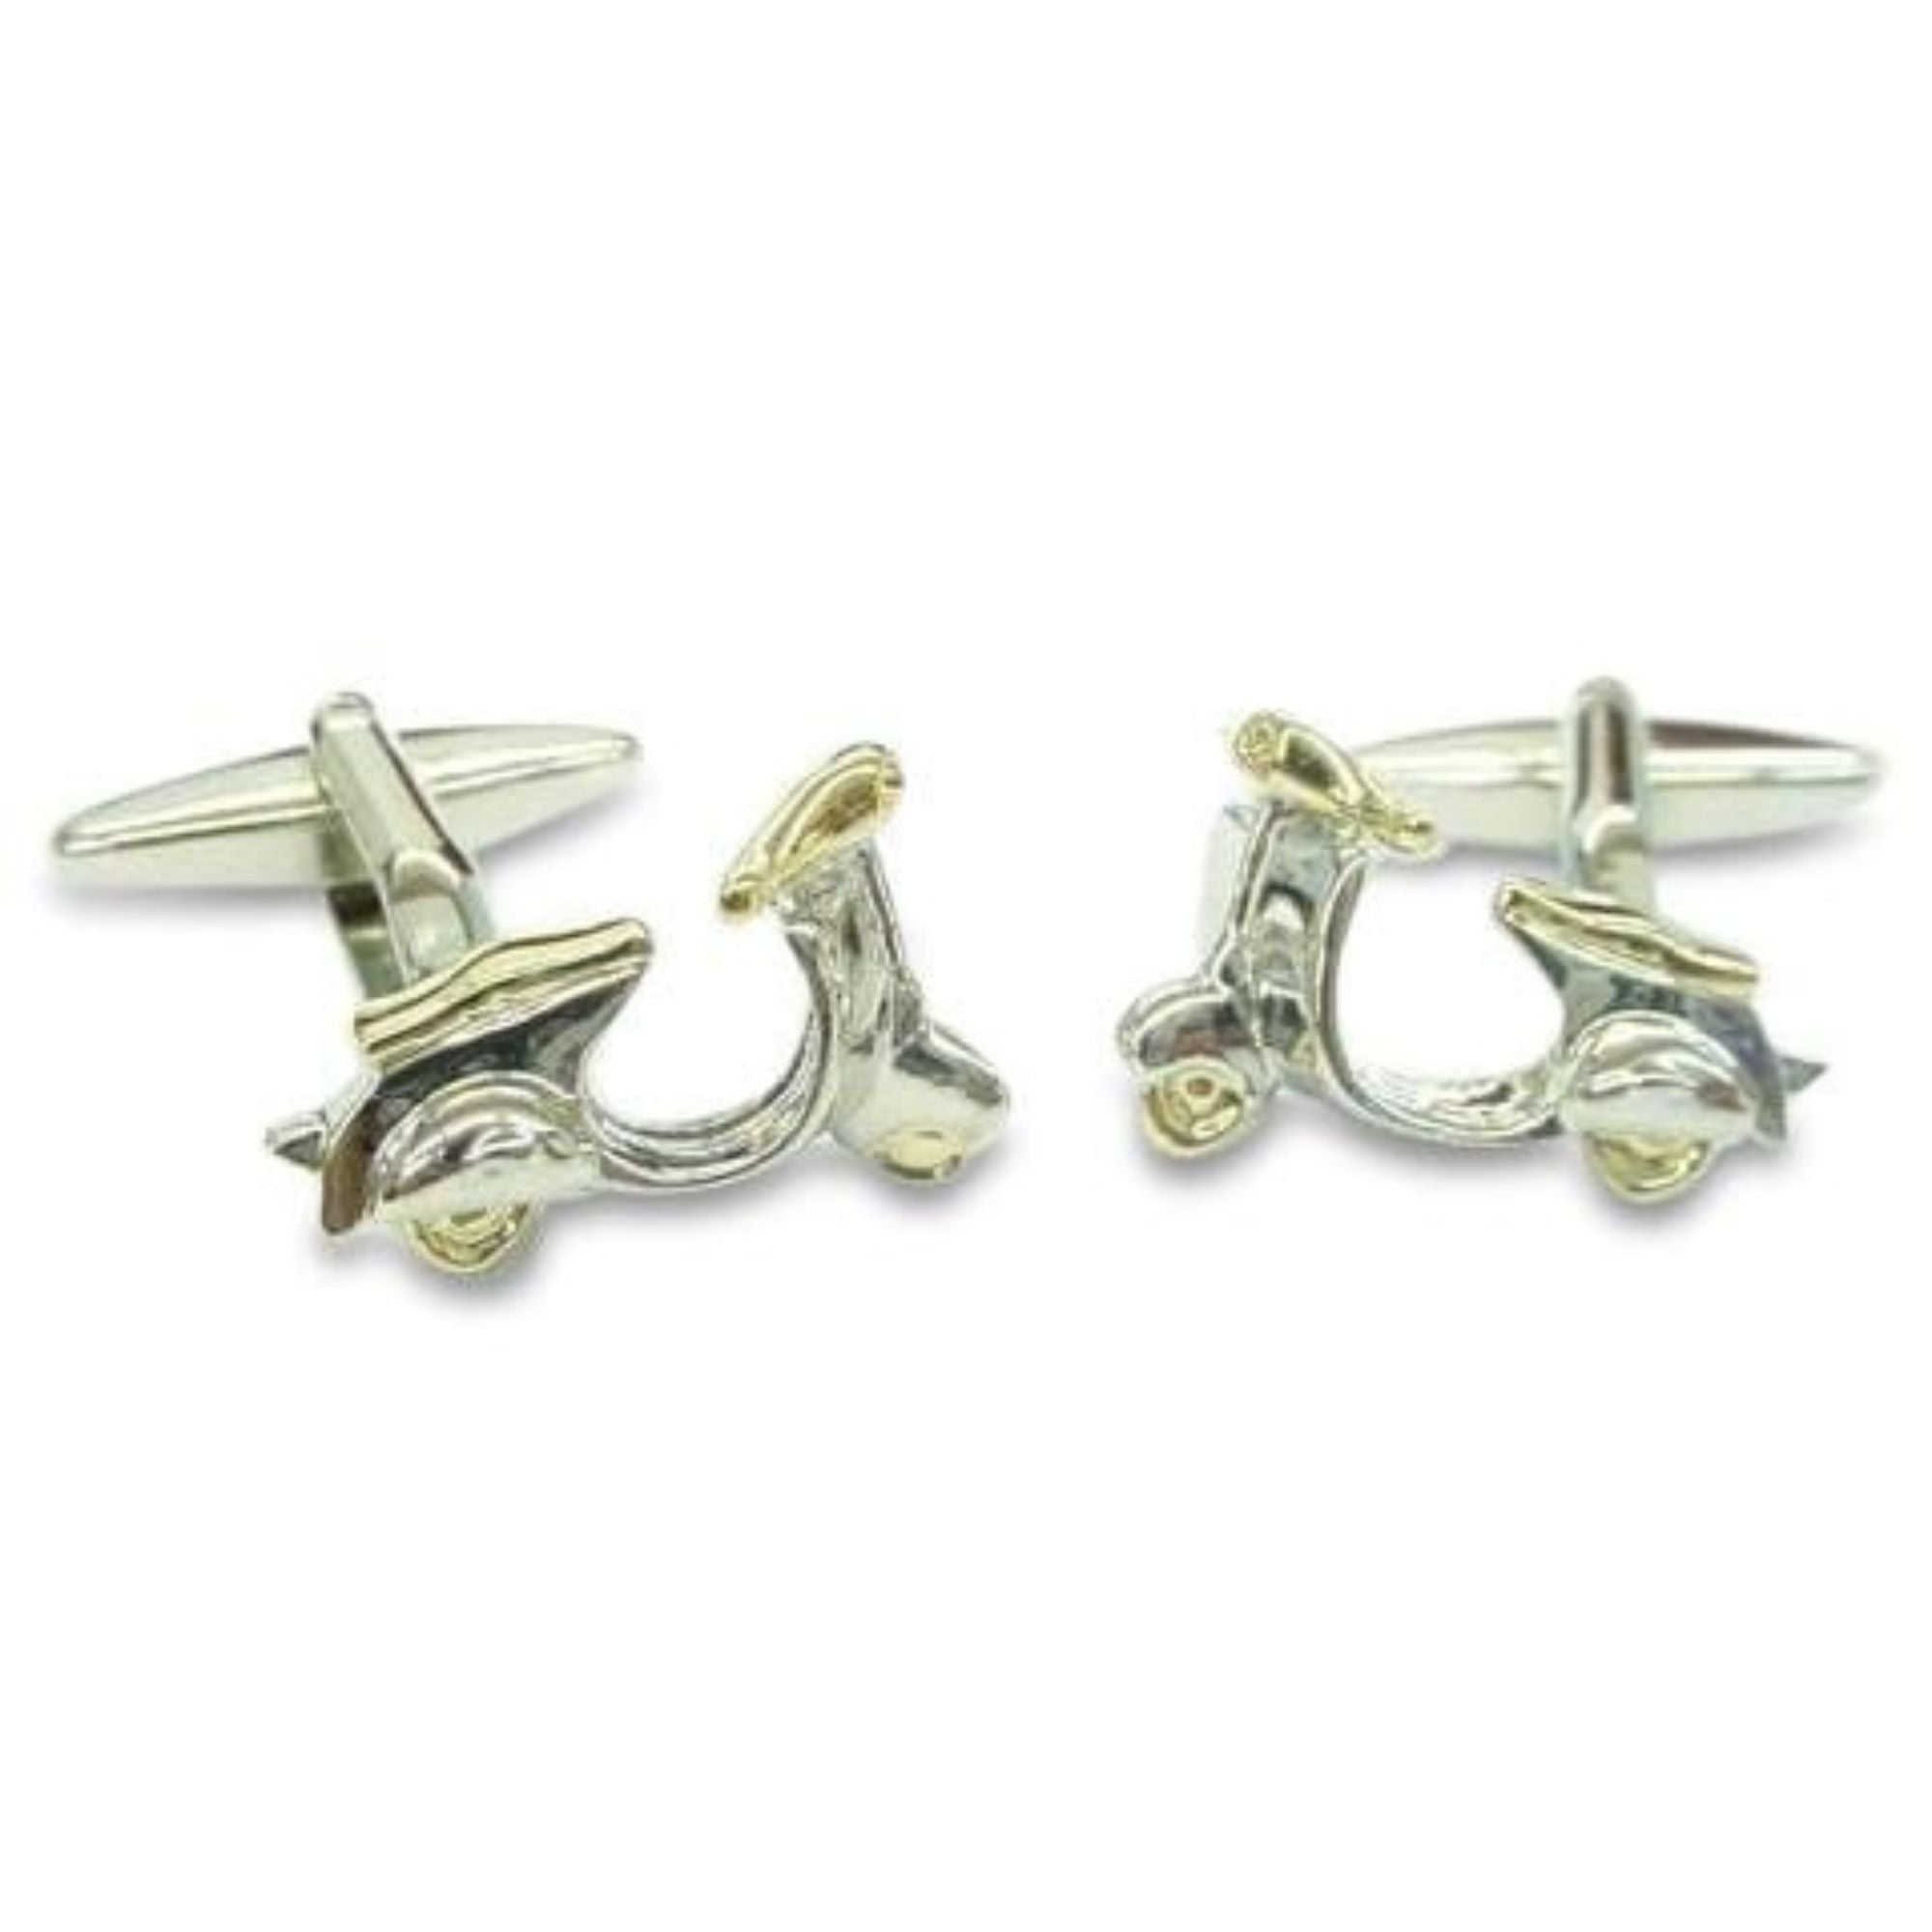 Gold Silver Scooters Cufflinks